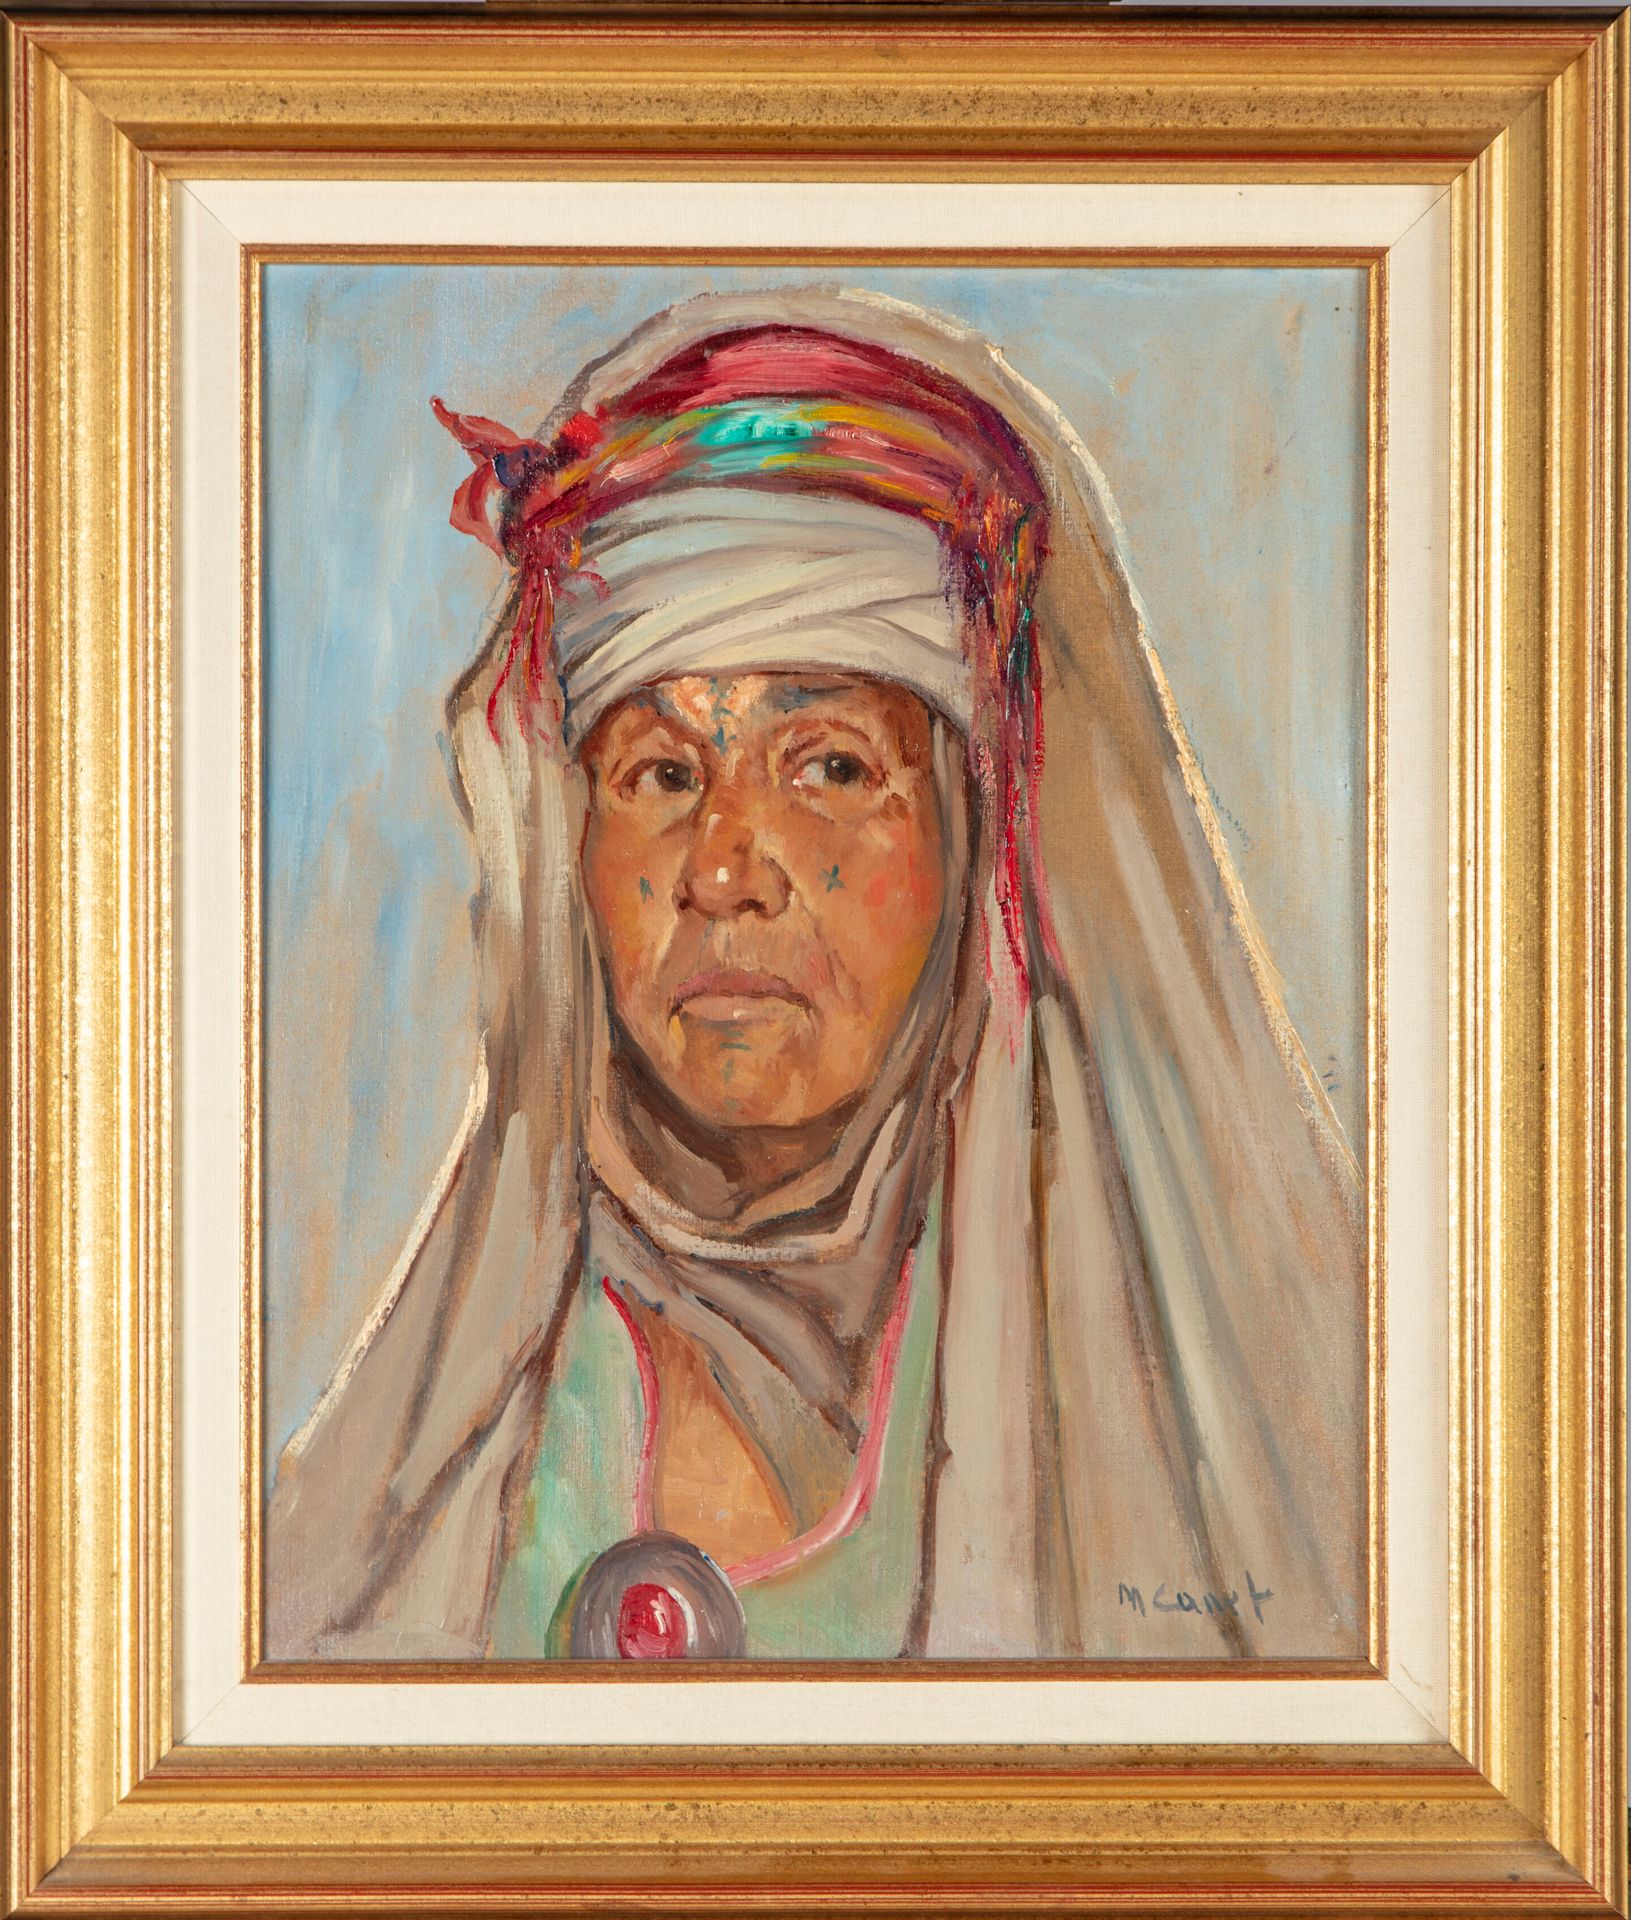 MARCEL CANET Marcel CANET (1875-1959)

Portrait of a Berber Woman

Oil on canvas&hellip;